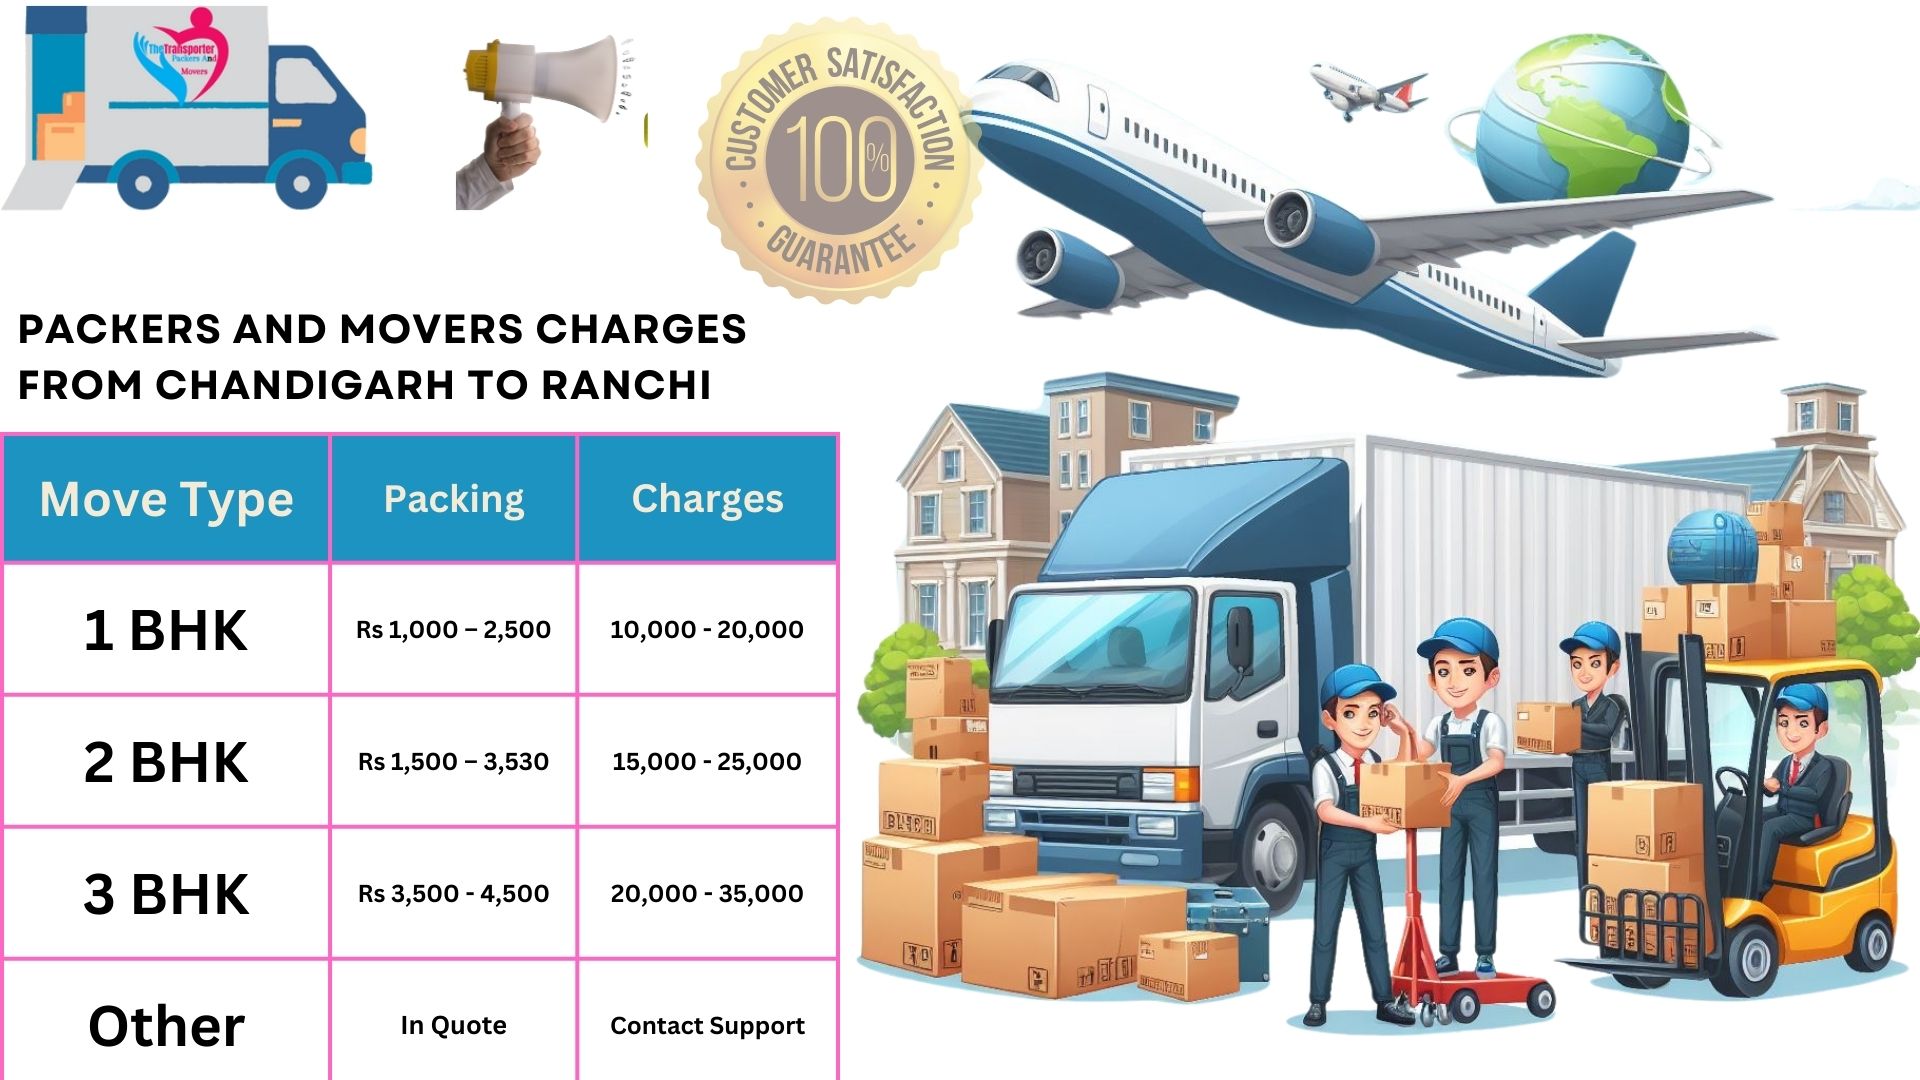 Packers and Movers rates list From Chandigarh to Ranchi